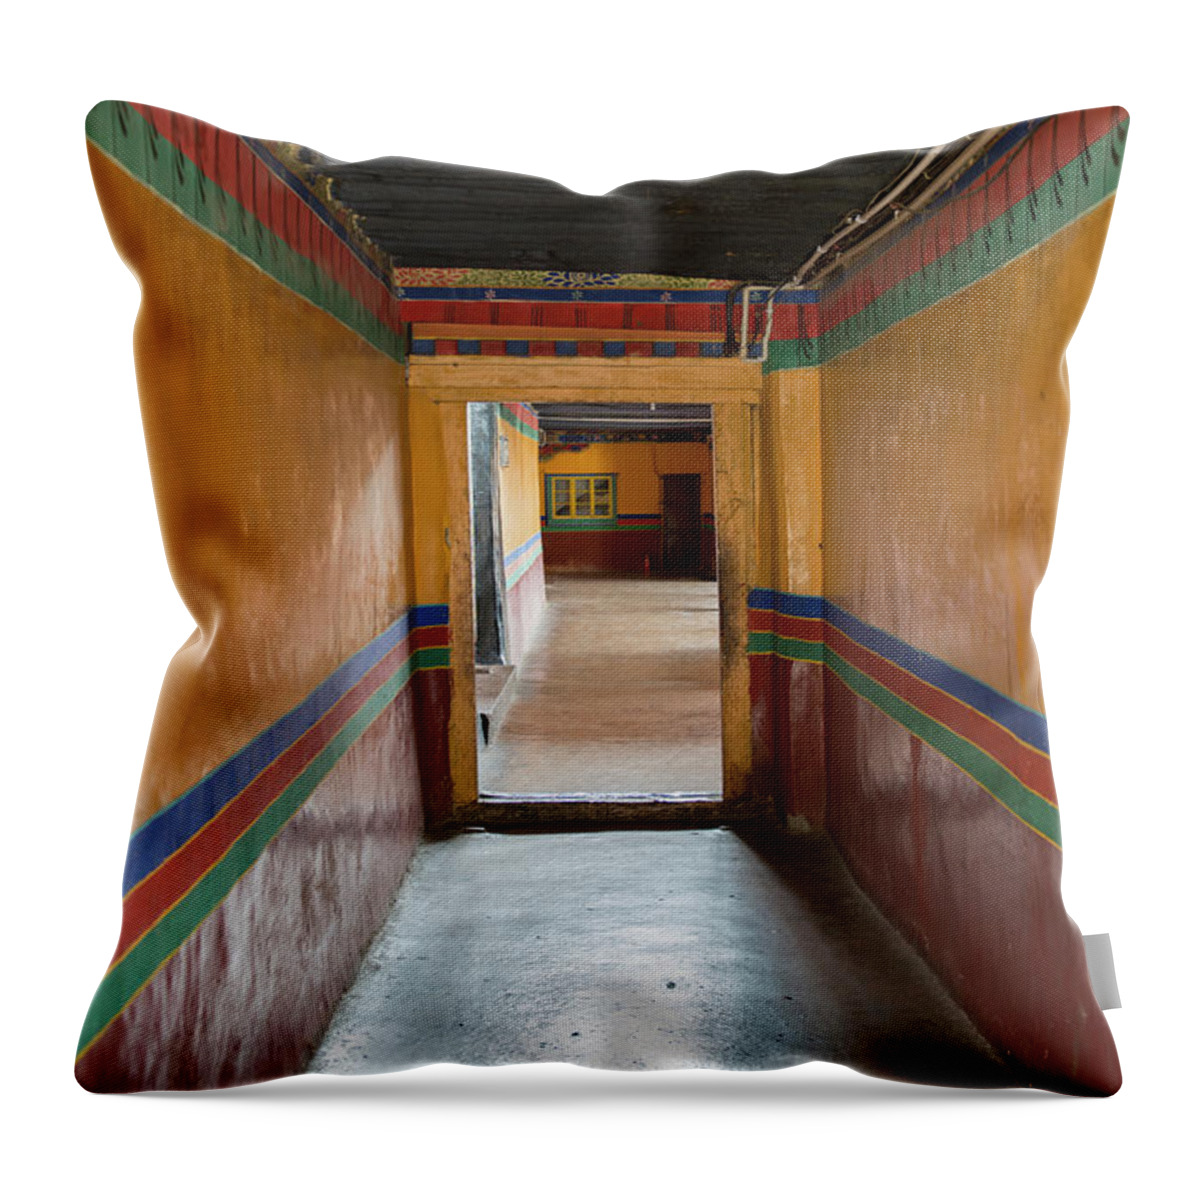 Chinese Culture Throw Pillow featuring the photograph Colourful Stripes Painted Down The by Keith Levit / Design Pics